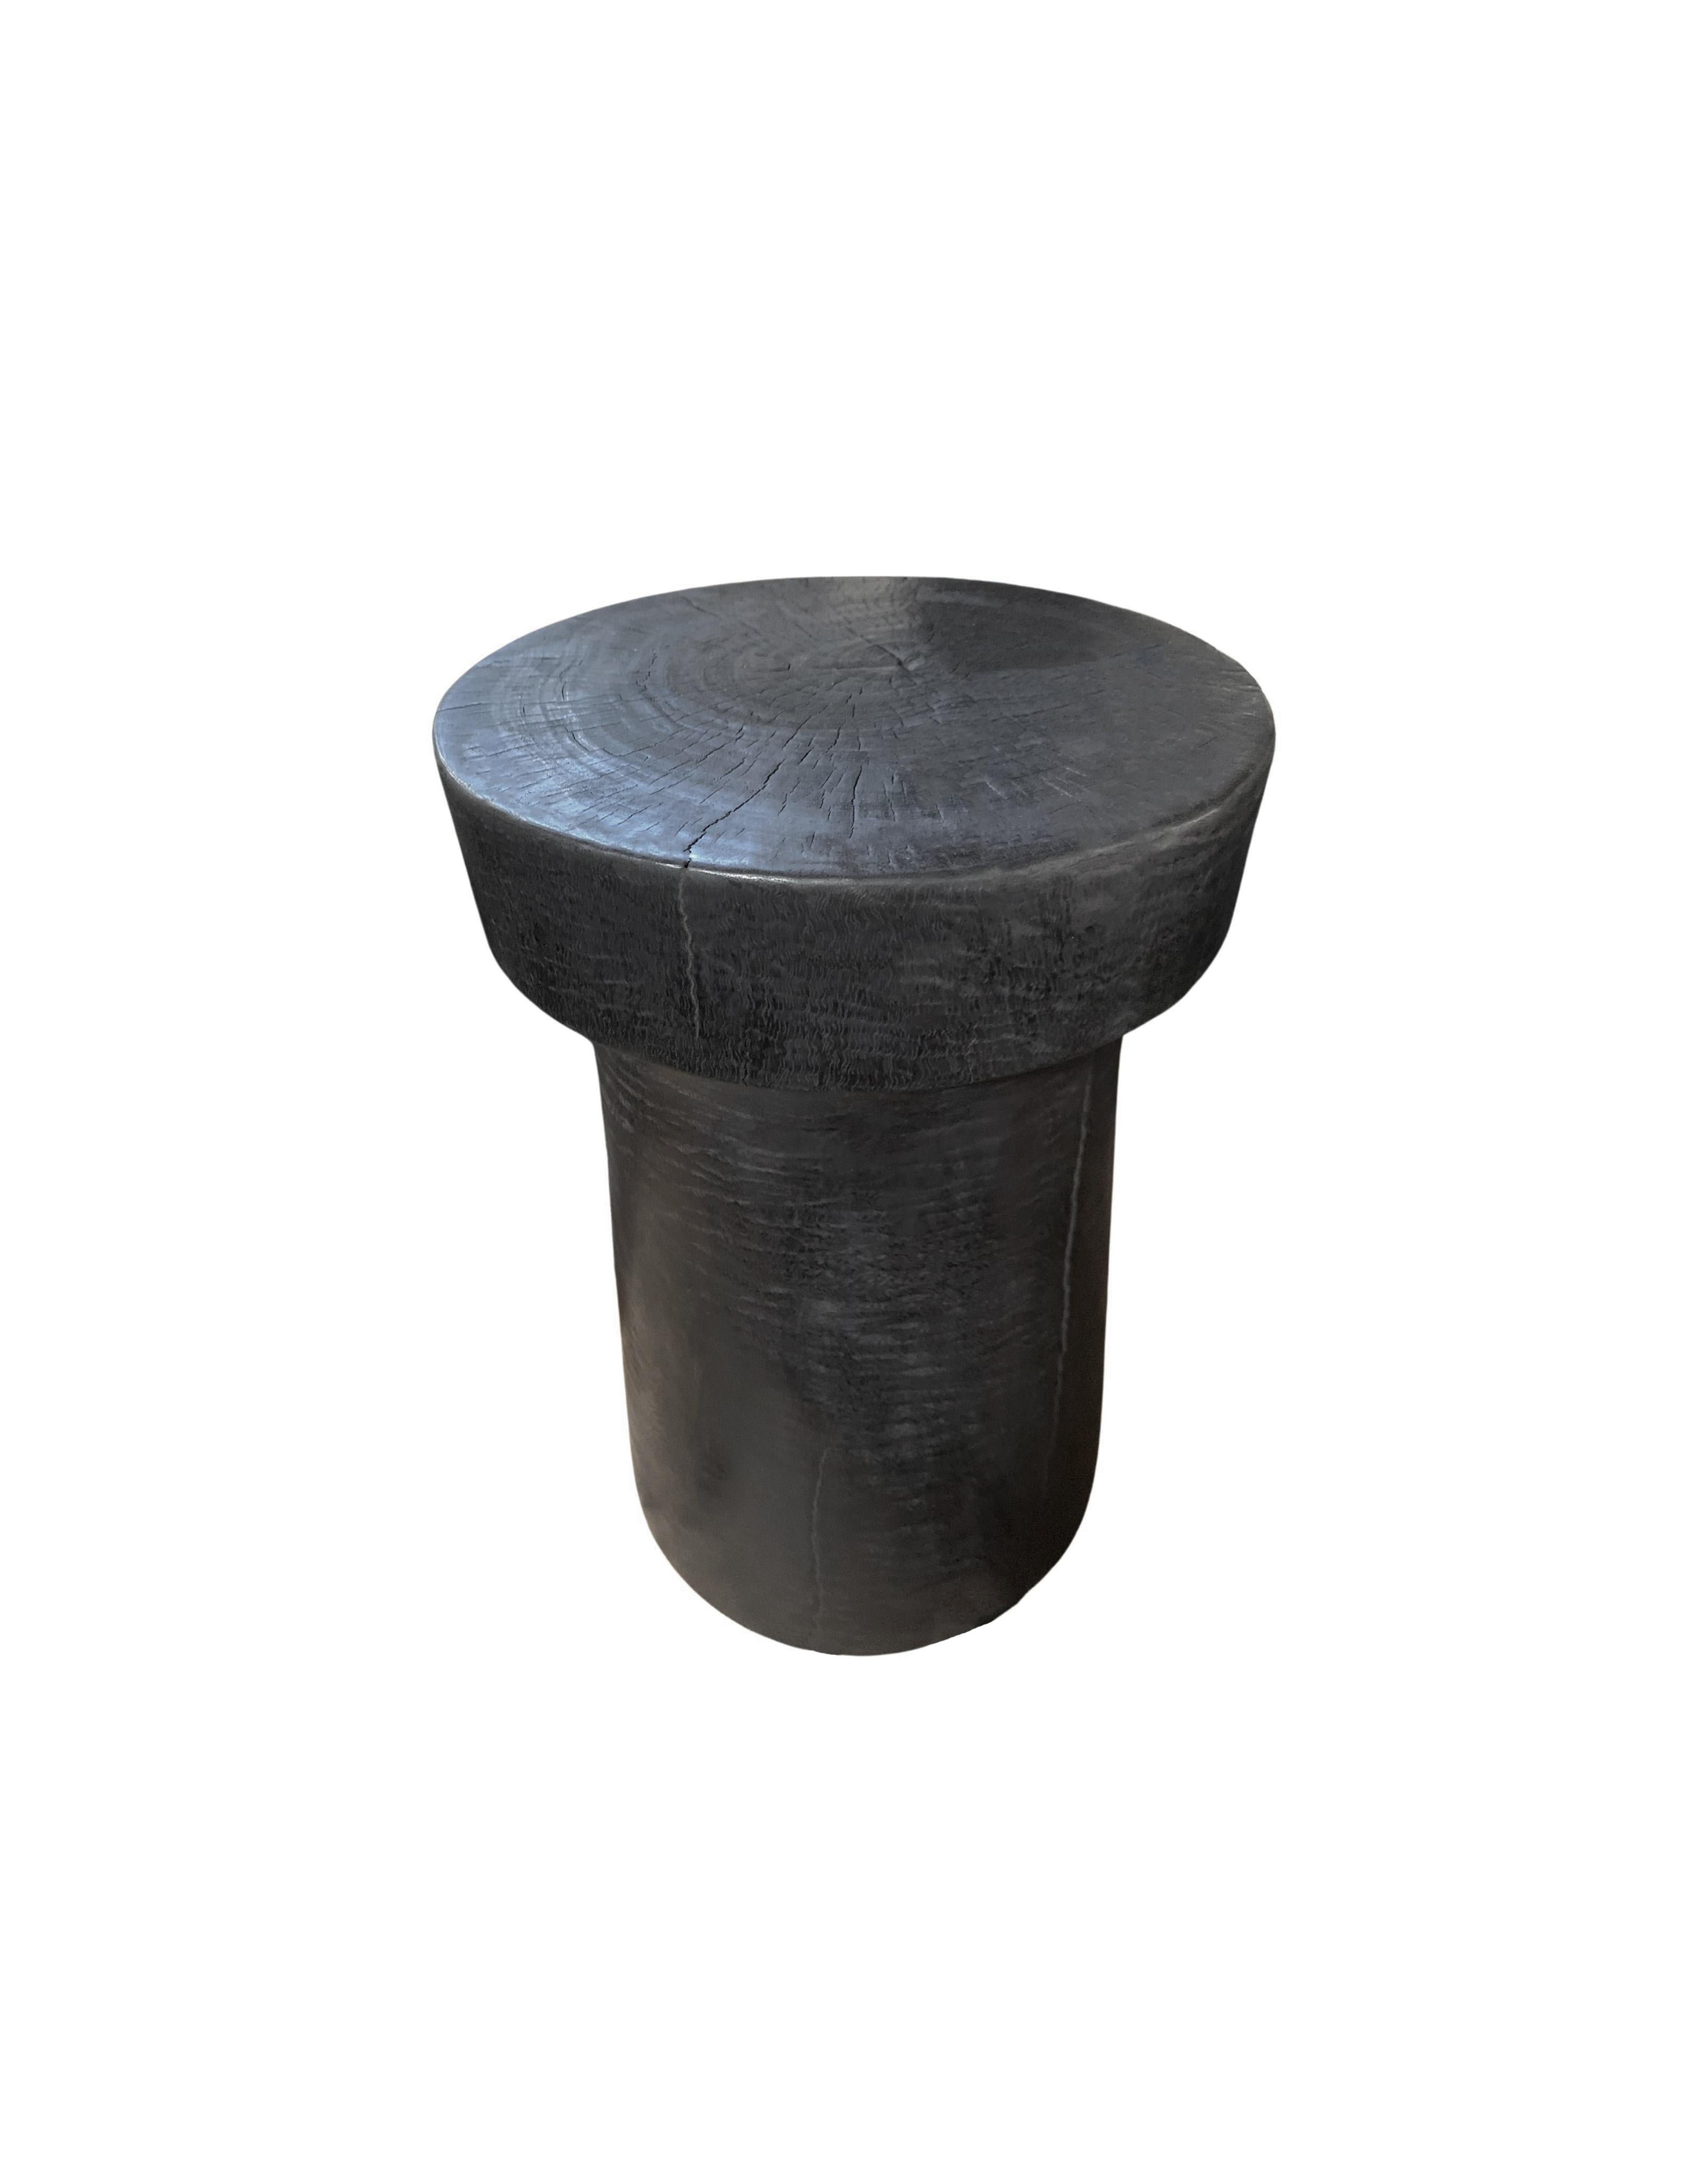 Indonesian Sculptural Side Table Crafted from Mango Wood, Burnt Finish For Sale